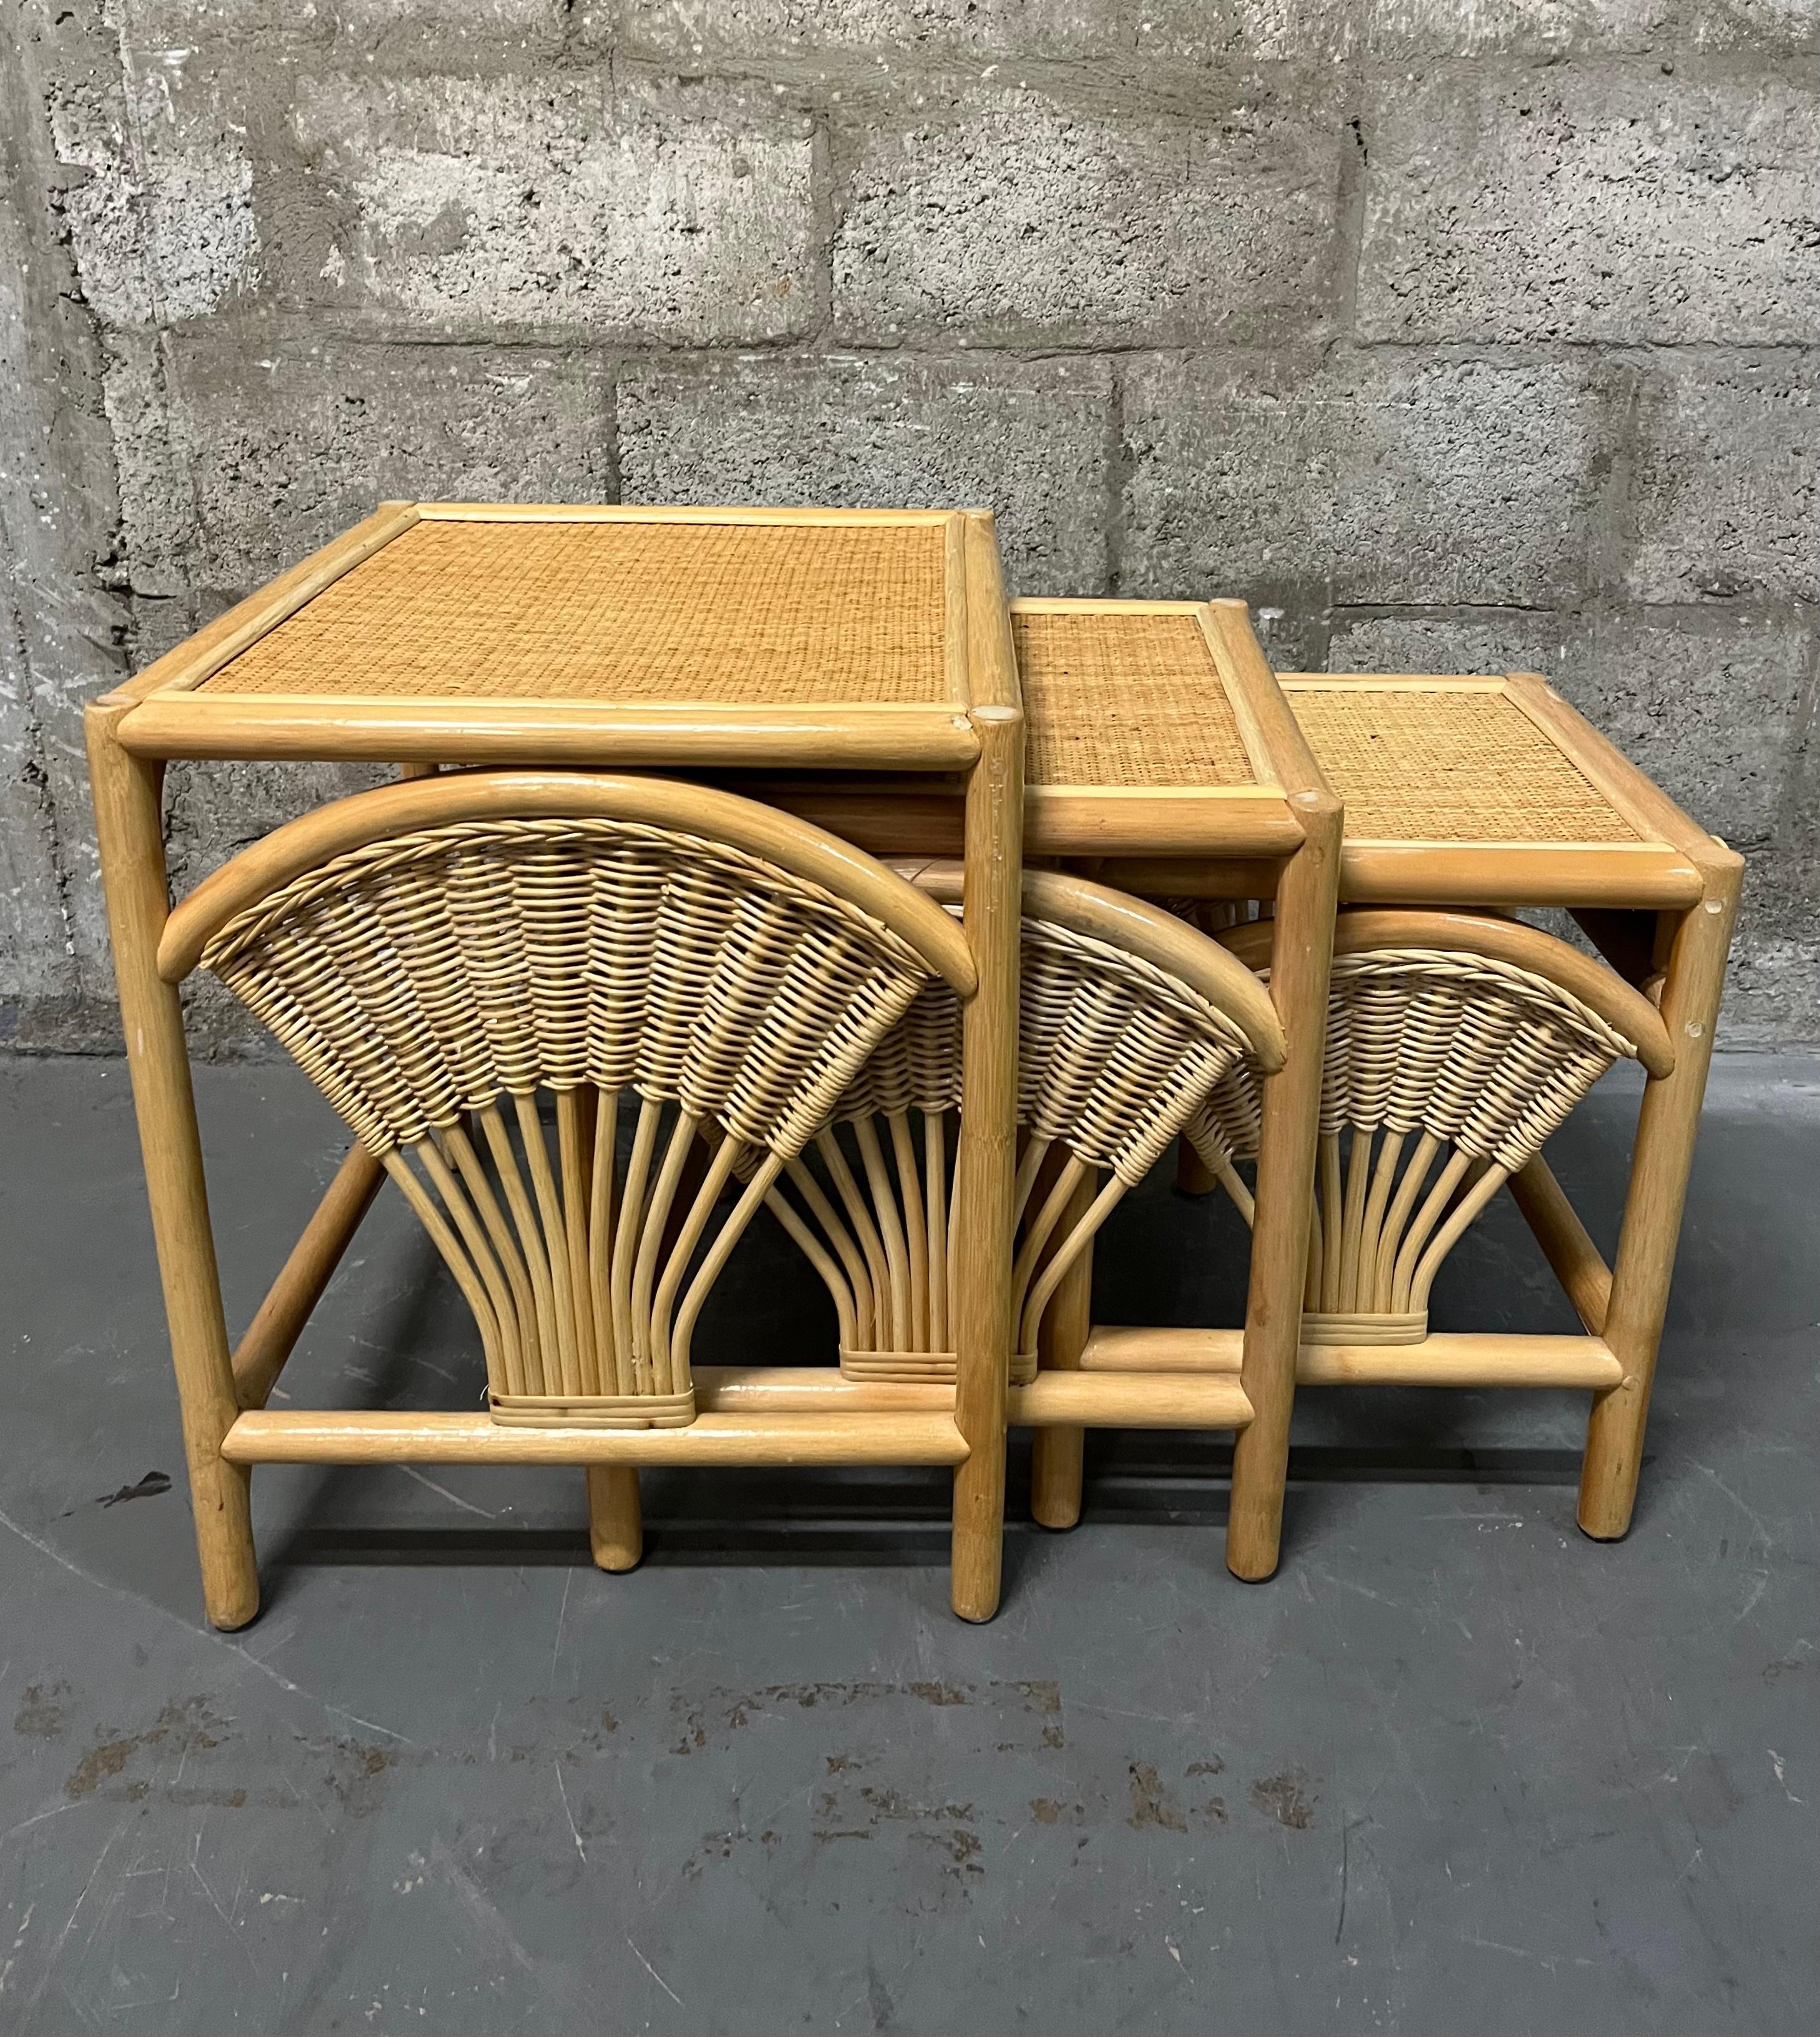 Vintage Coastal Style Bohemian Wheat Sheaf Rattan Nesting Tables. Circa 1980s
Feature a stylish sheaf of wheat design side panels and a beautiful braid trim detail at front in a natural rattan color.
In excellent original condition with very minor